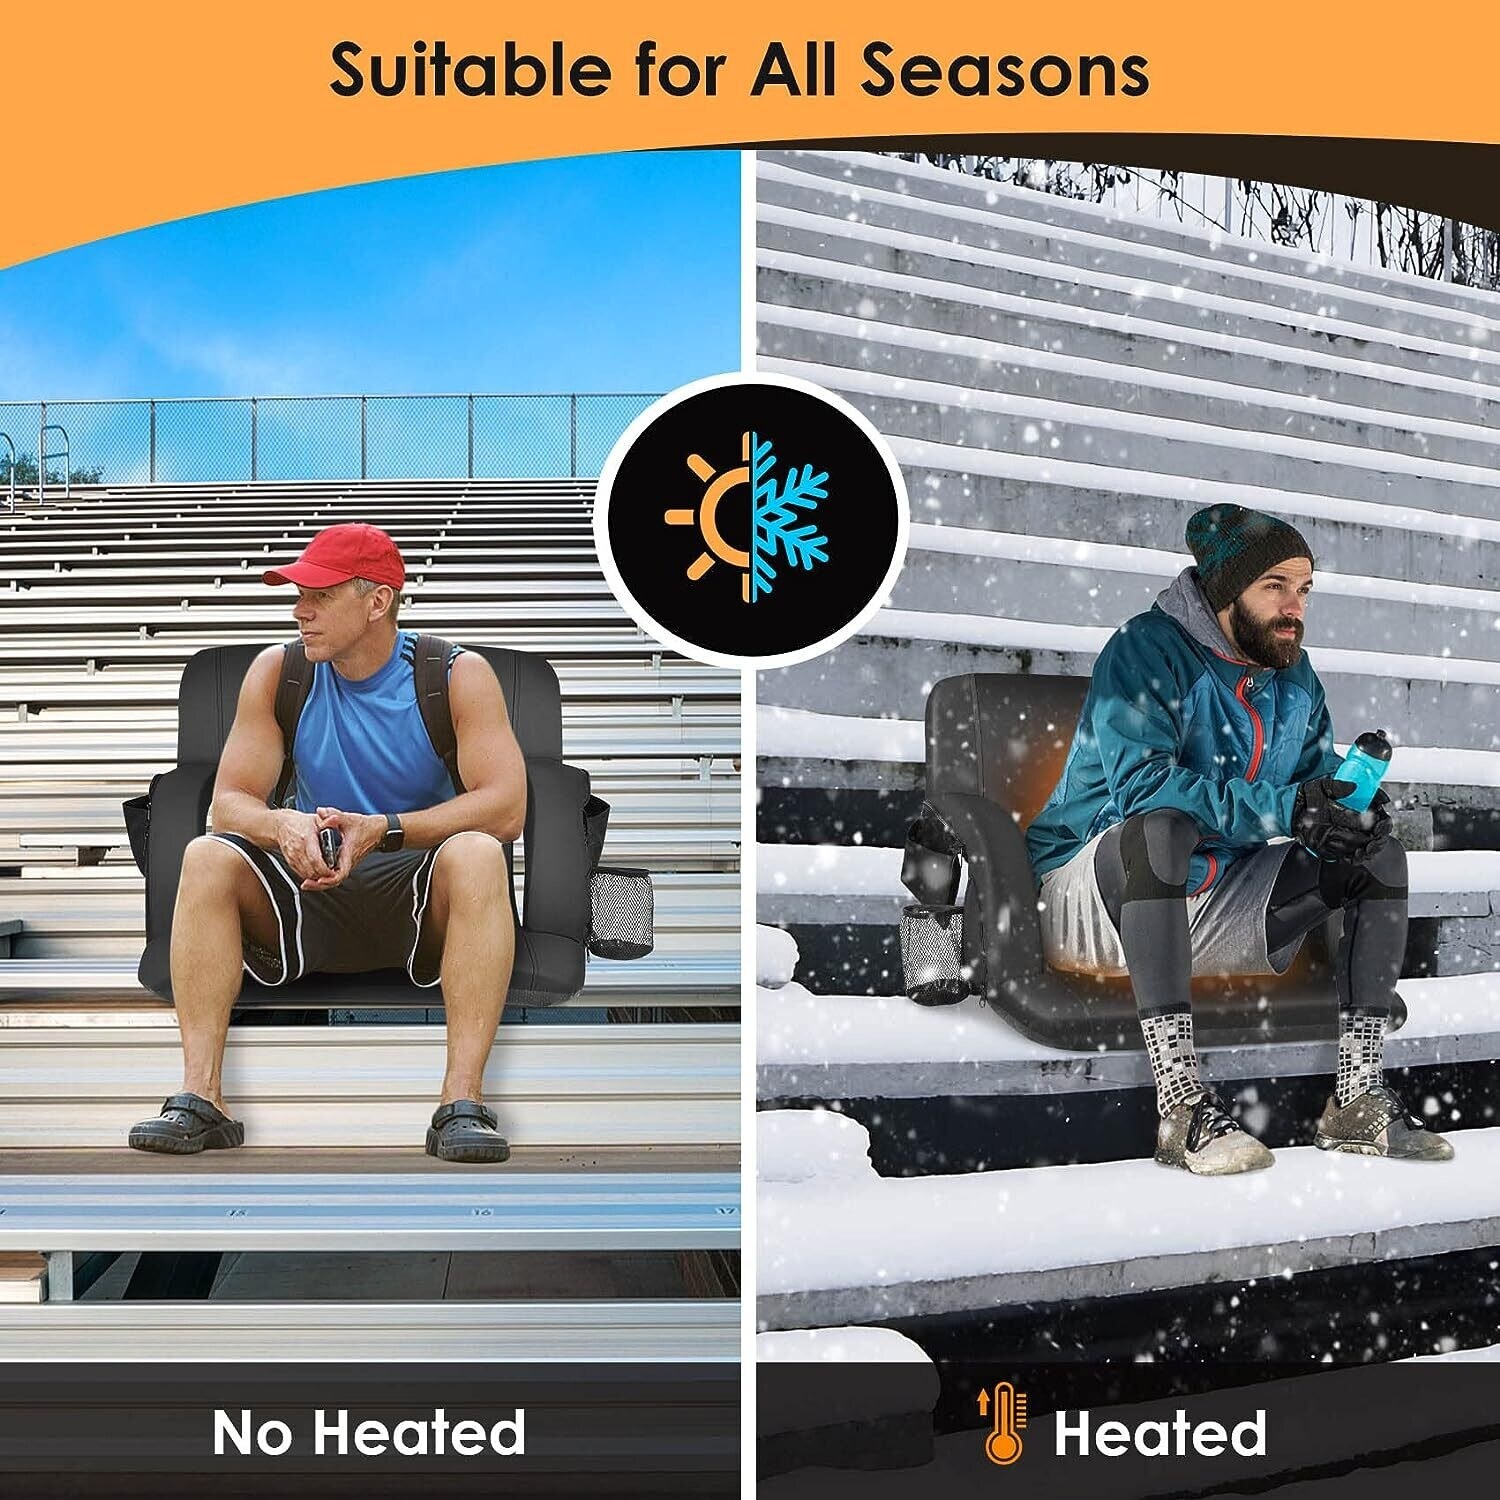 https://ak1.ostkcdn.com/images/products/is/images/direct/8a266724a08e40d2a598f5e5be937ec181b26bcd/Heated-Stadium-Seats-for-Bleachers-with-Back-Support-and-Wide-Cushion%2C-Extra-Portable-Bleacher-Seat-Foldable-Stadium-Chair.jpg